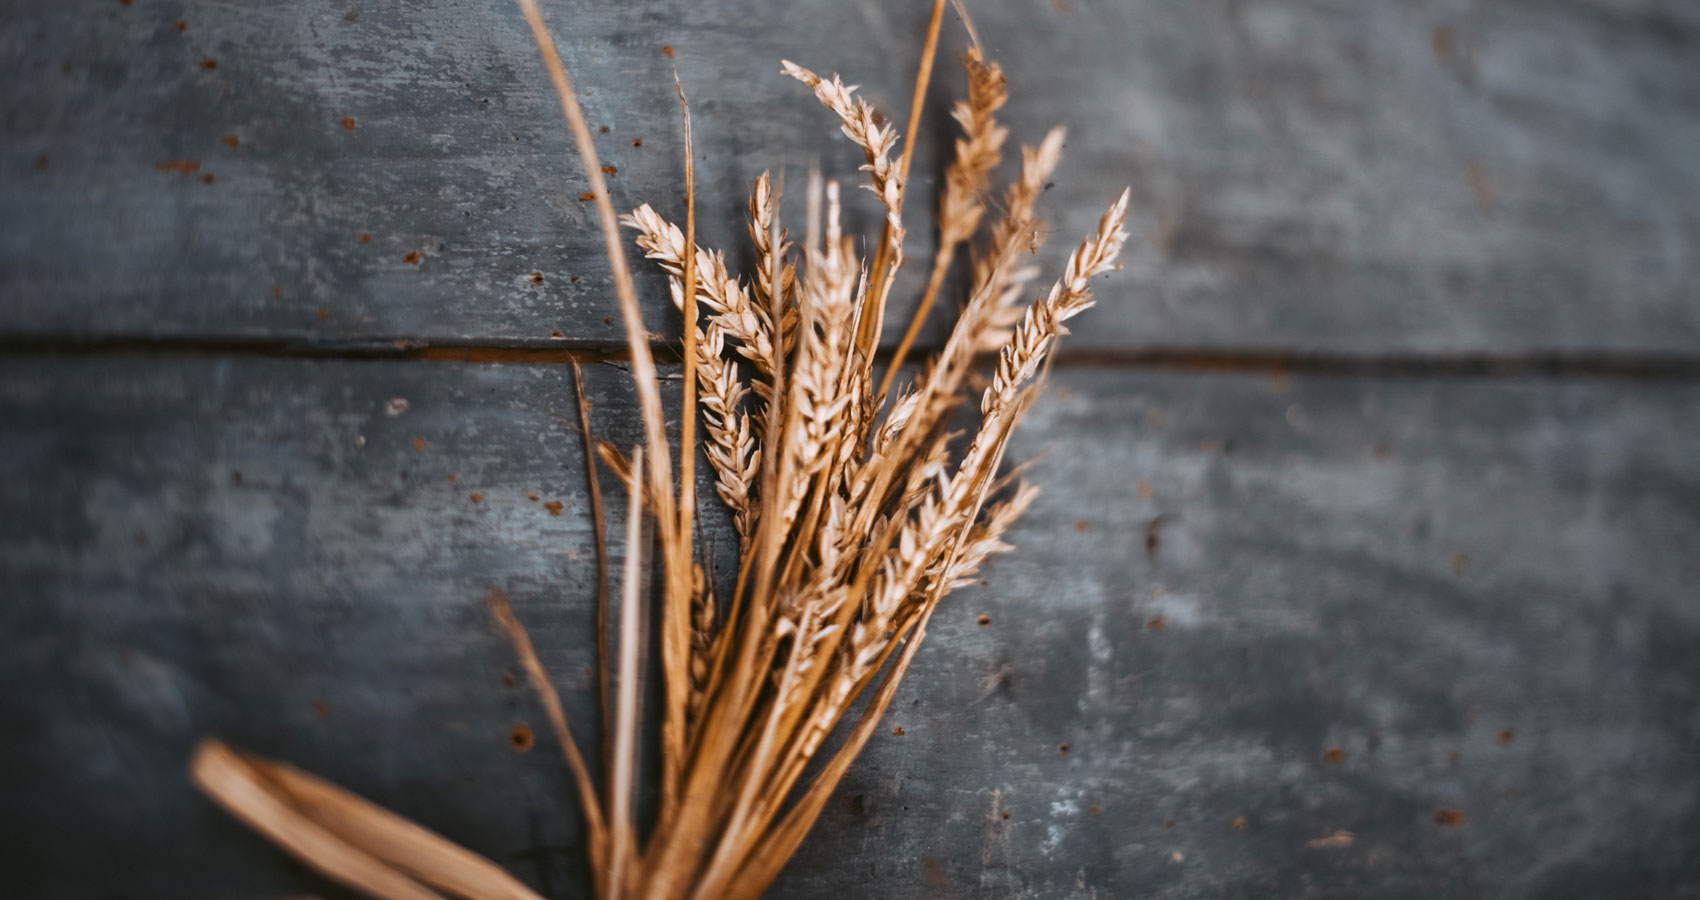 Wheat From The Chaff, micropoetry by Katie Lewington at Spillwords.com